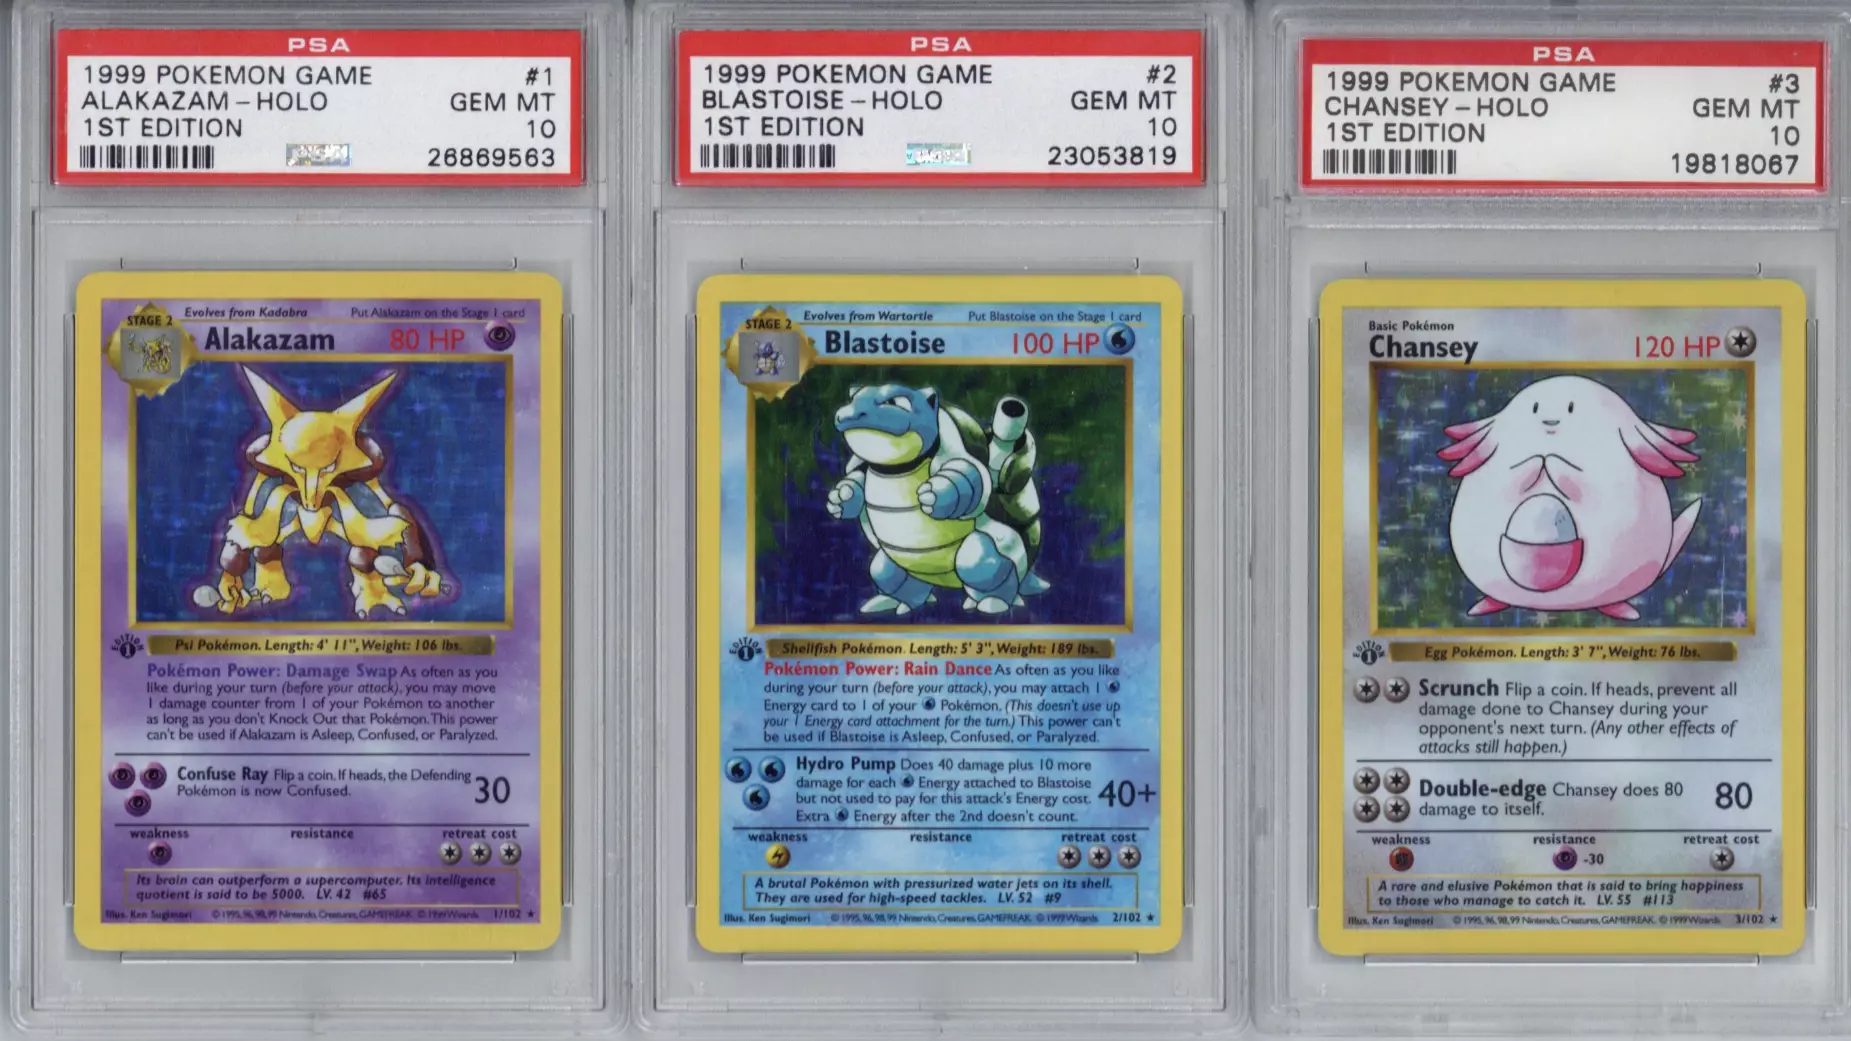 This Complete 1999 Pokémon Card Collection Sold For More Than $150,000 At Auction